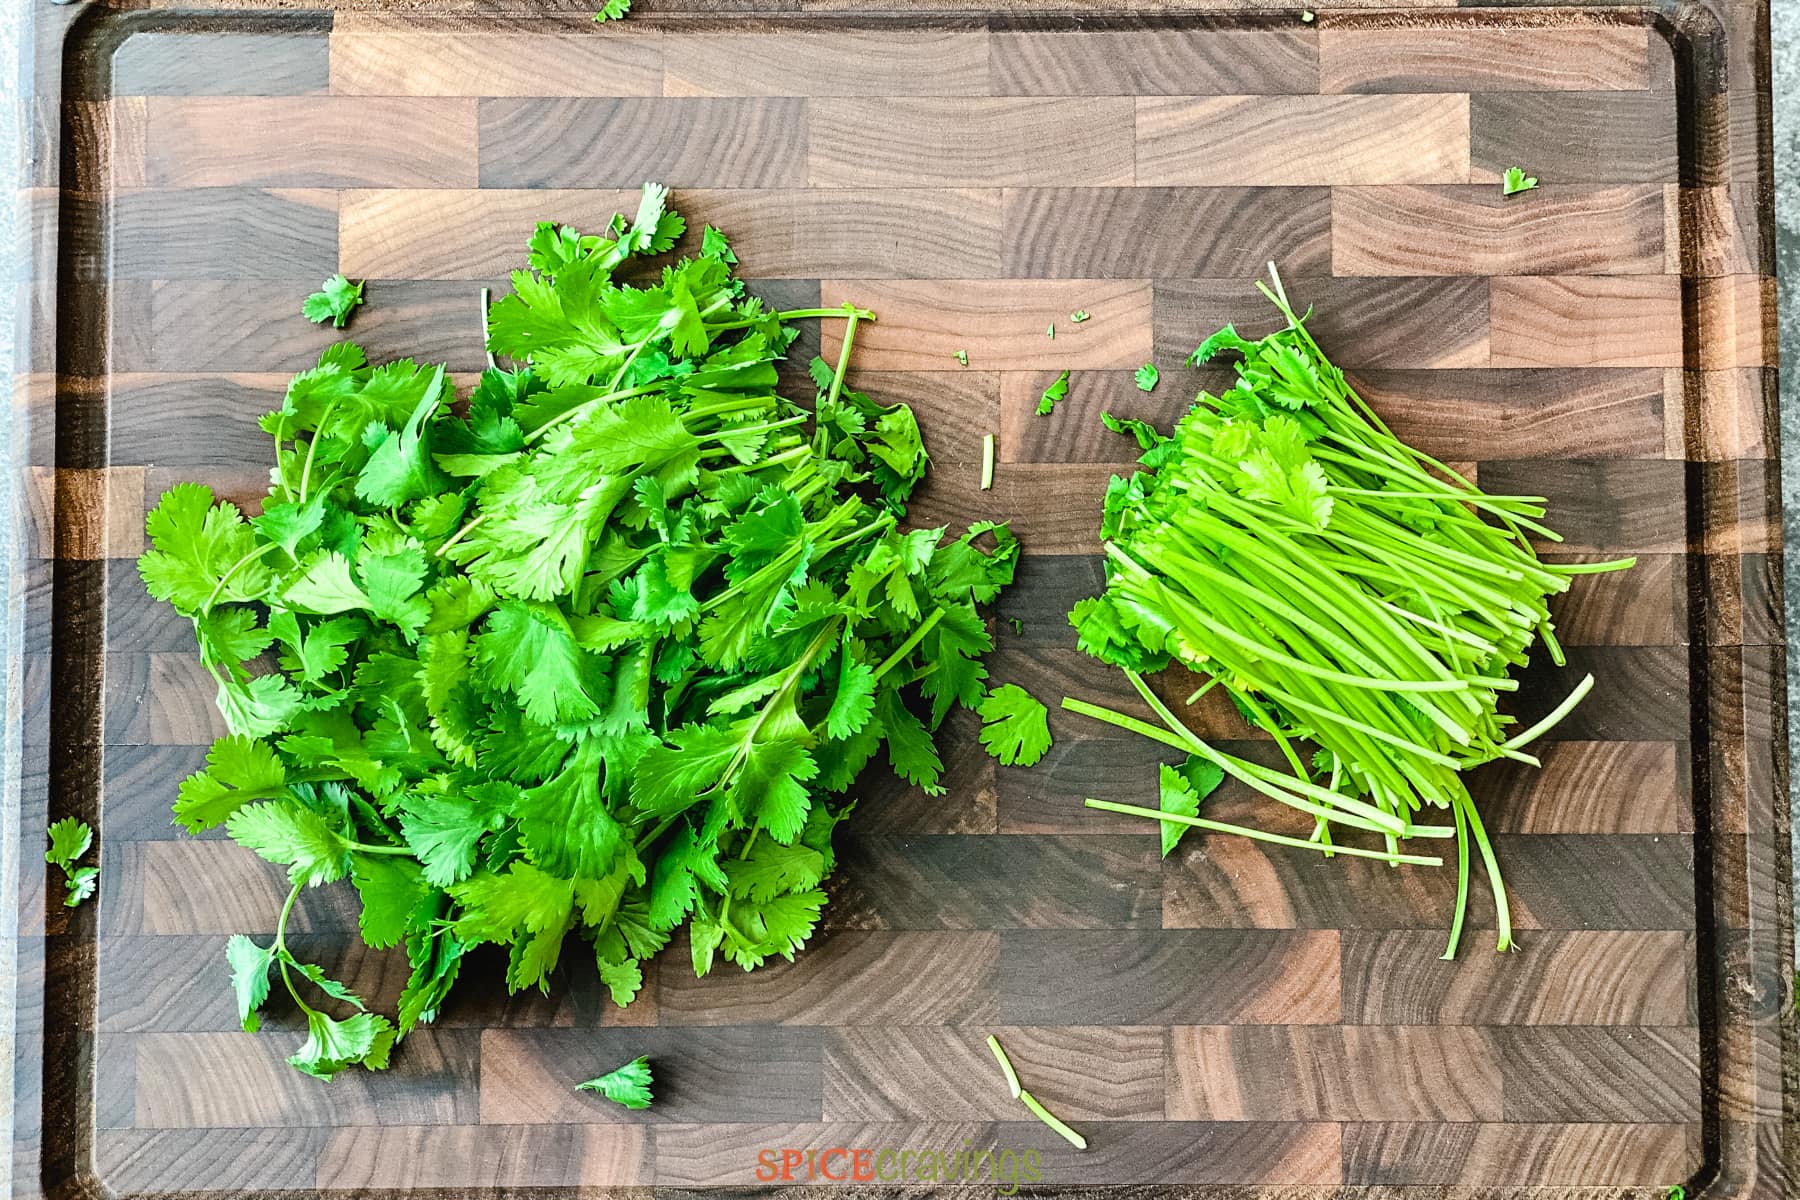 stems cut off of cilantro leaves on cutting board